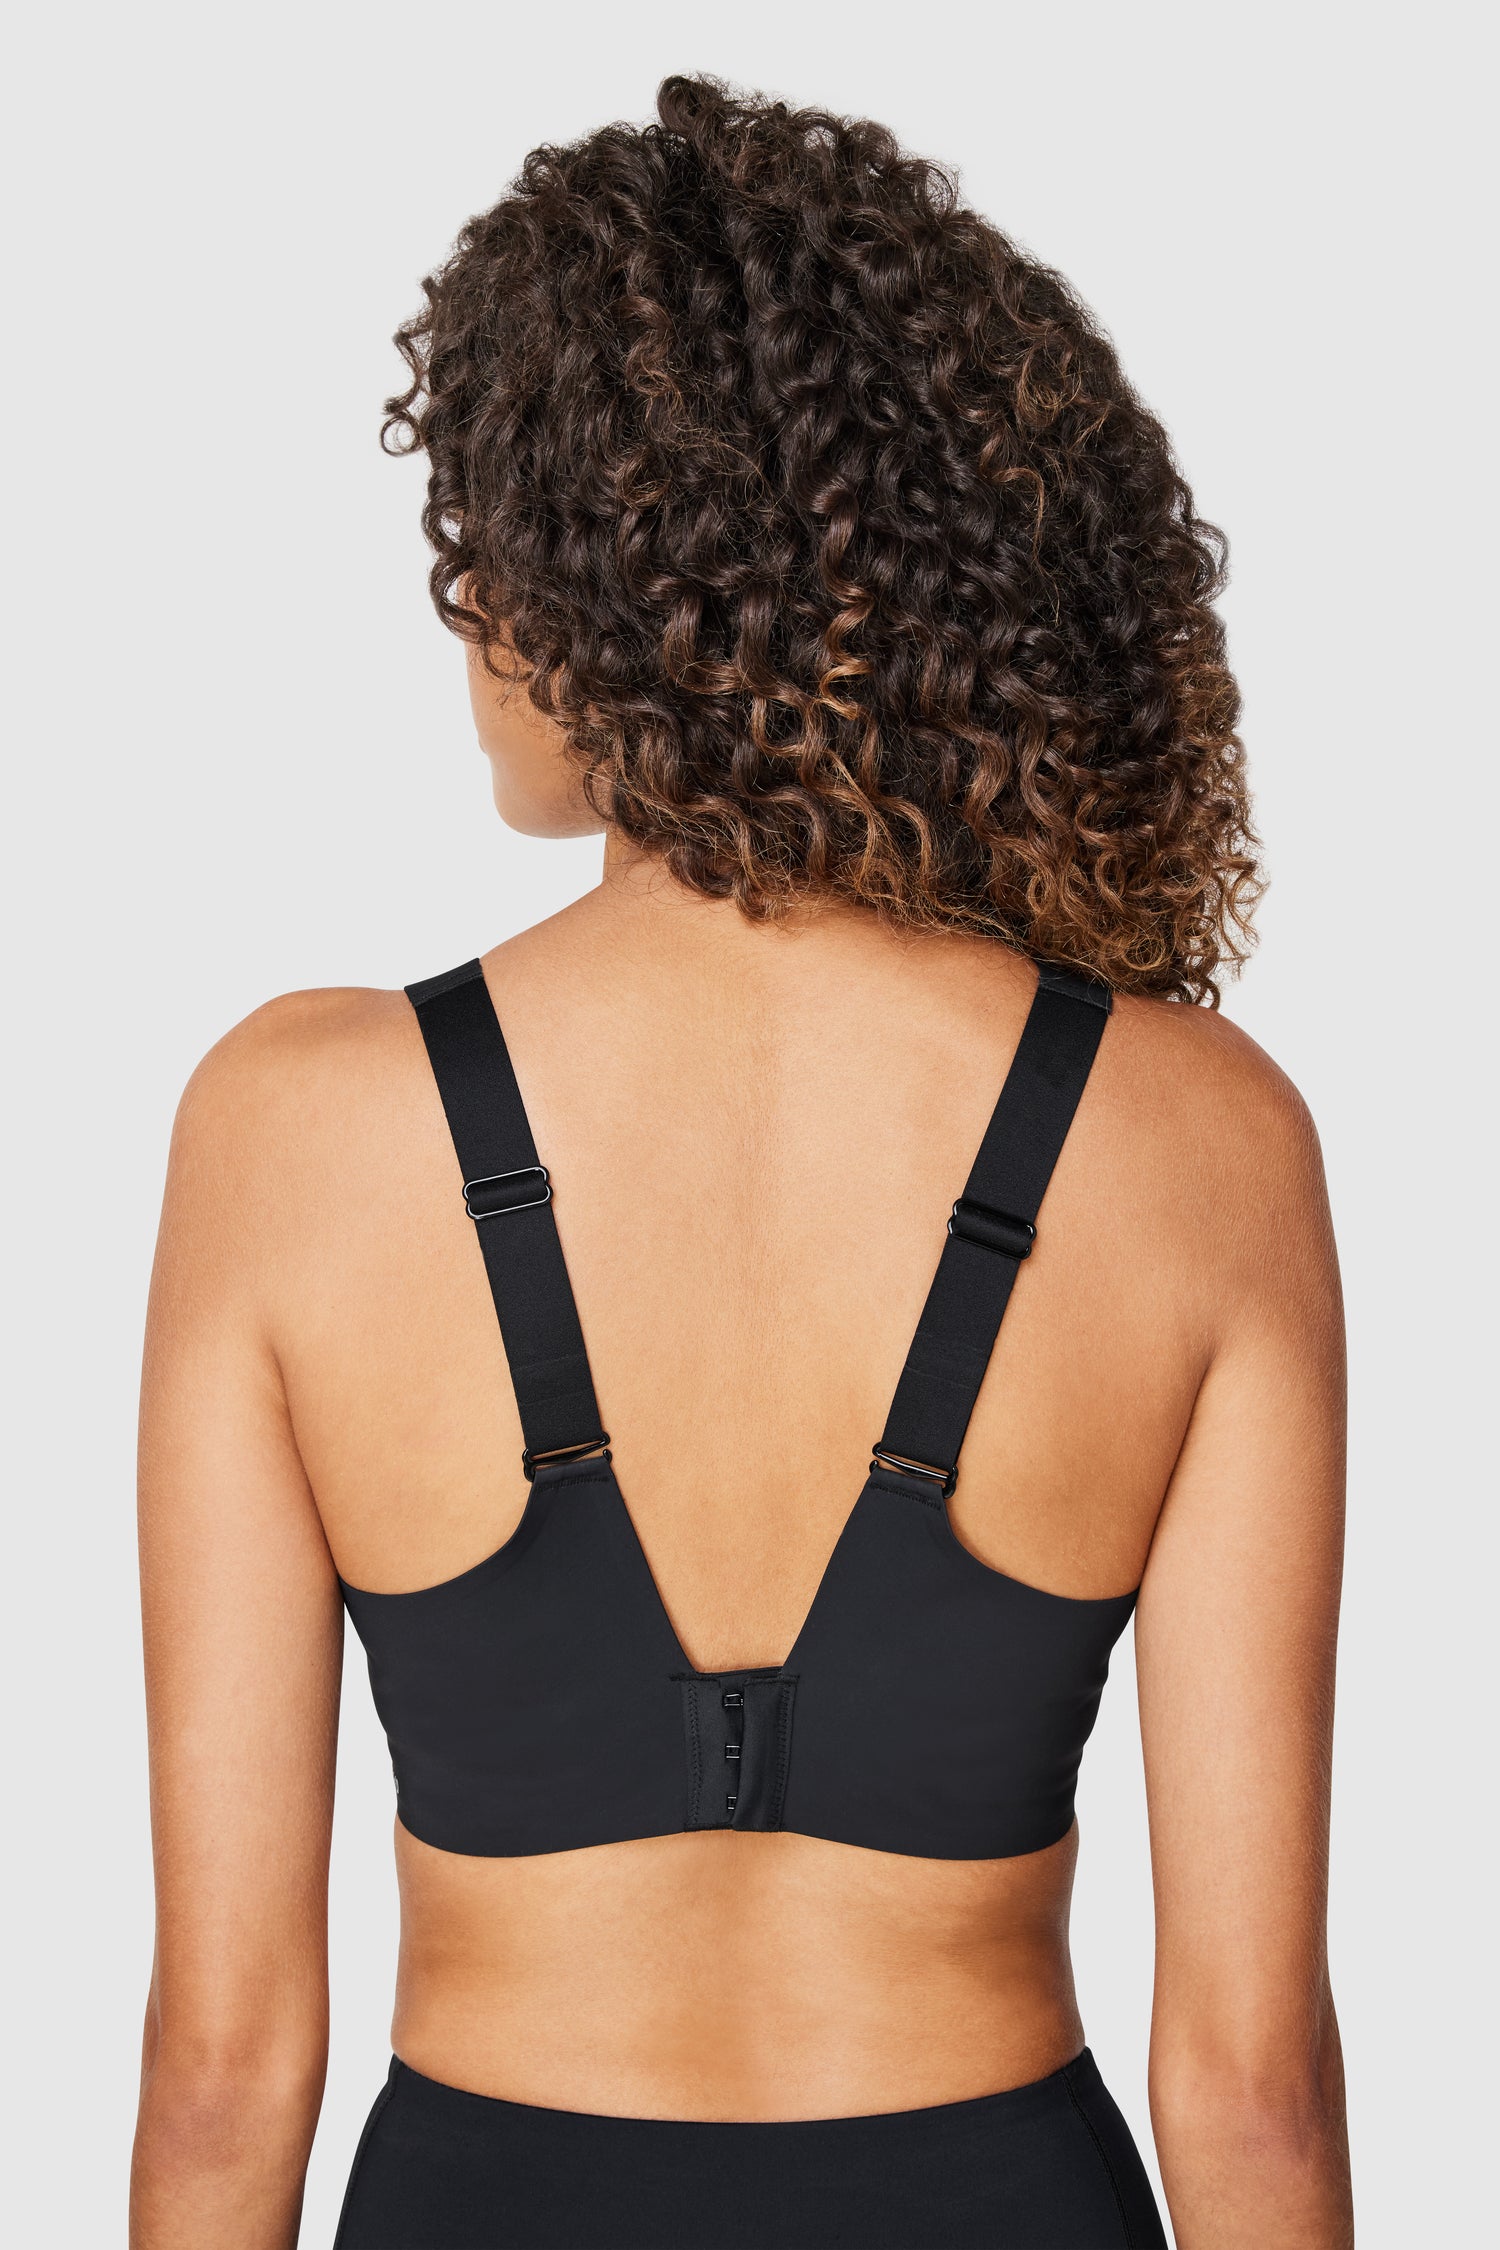 Caramelcc Womens High Impact Wirefree Front Zip Sports Bra